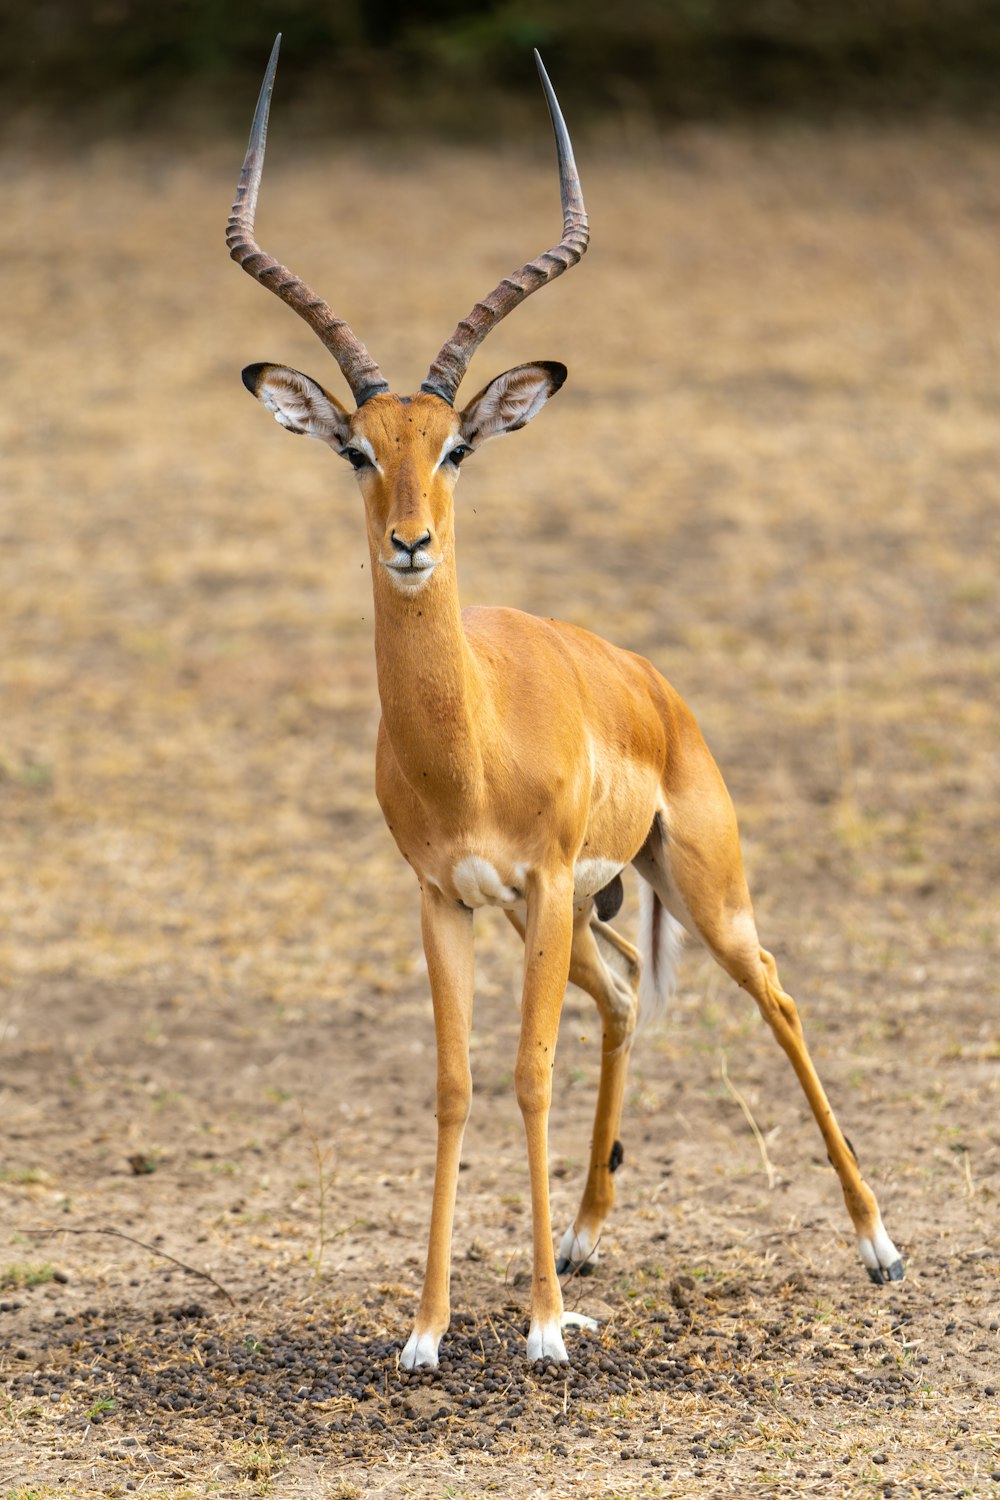 a gazelle standing in the middle of a field